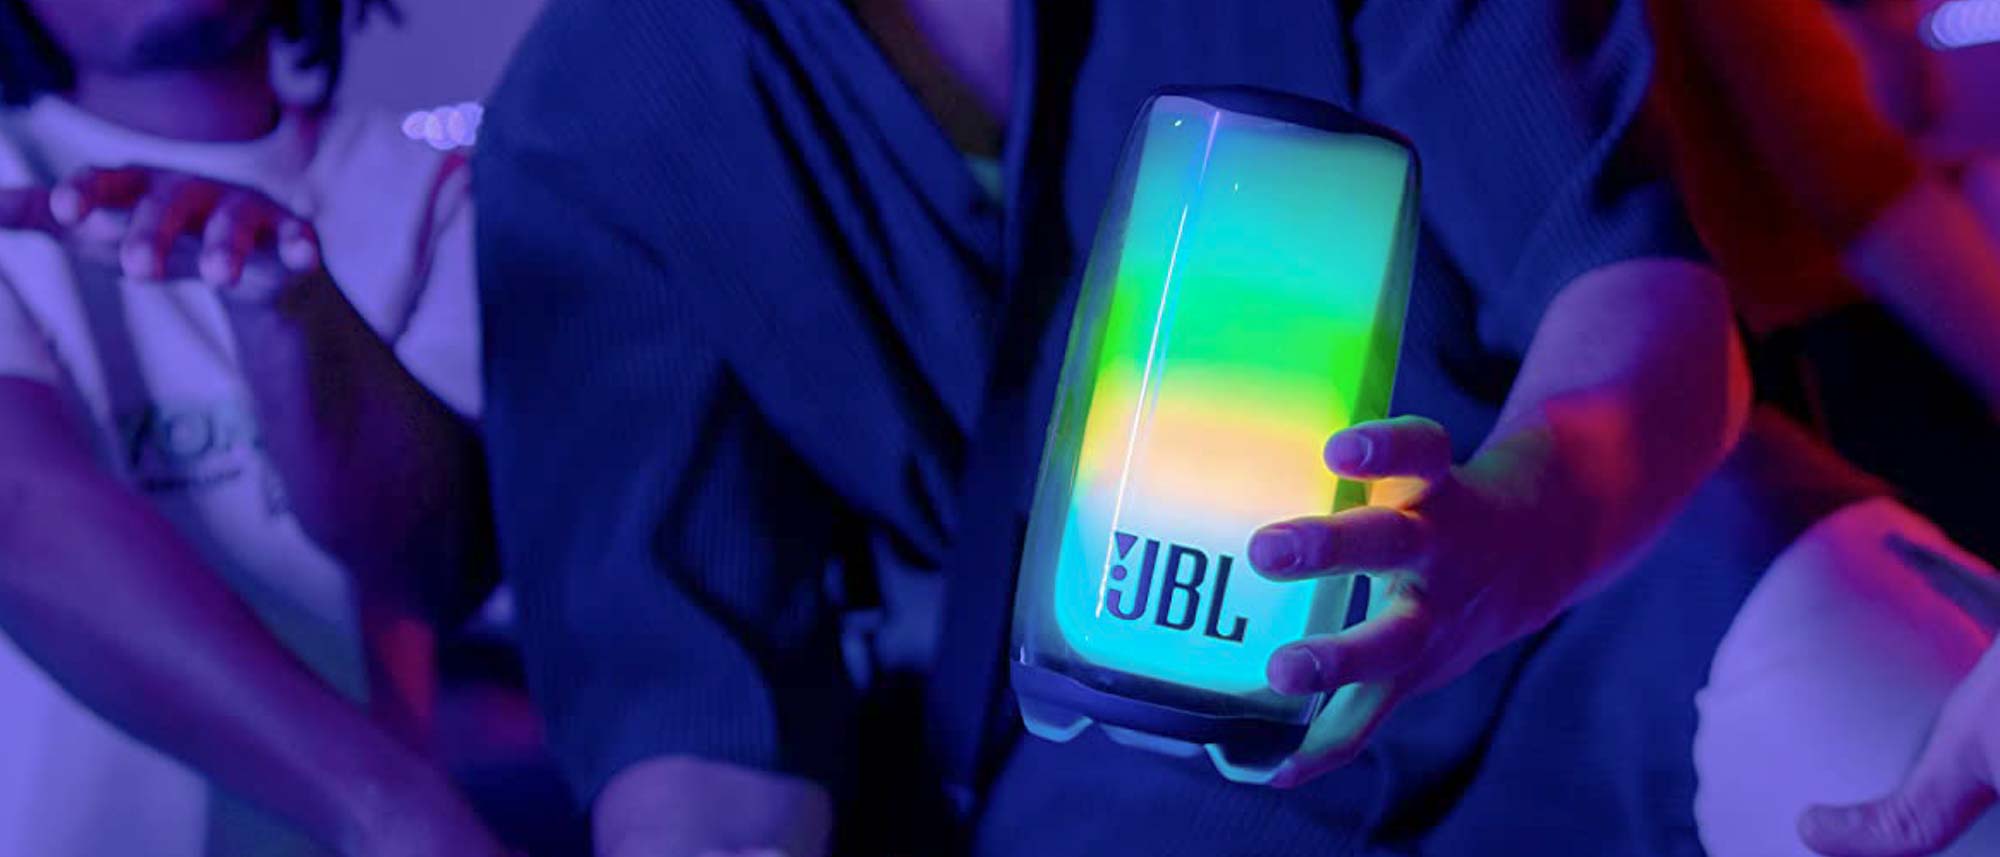 JBL Pulse 5 review: this light-up speaker will get the party started